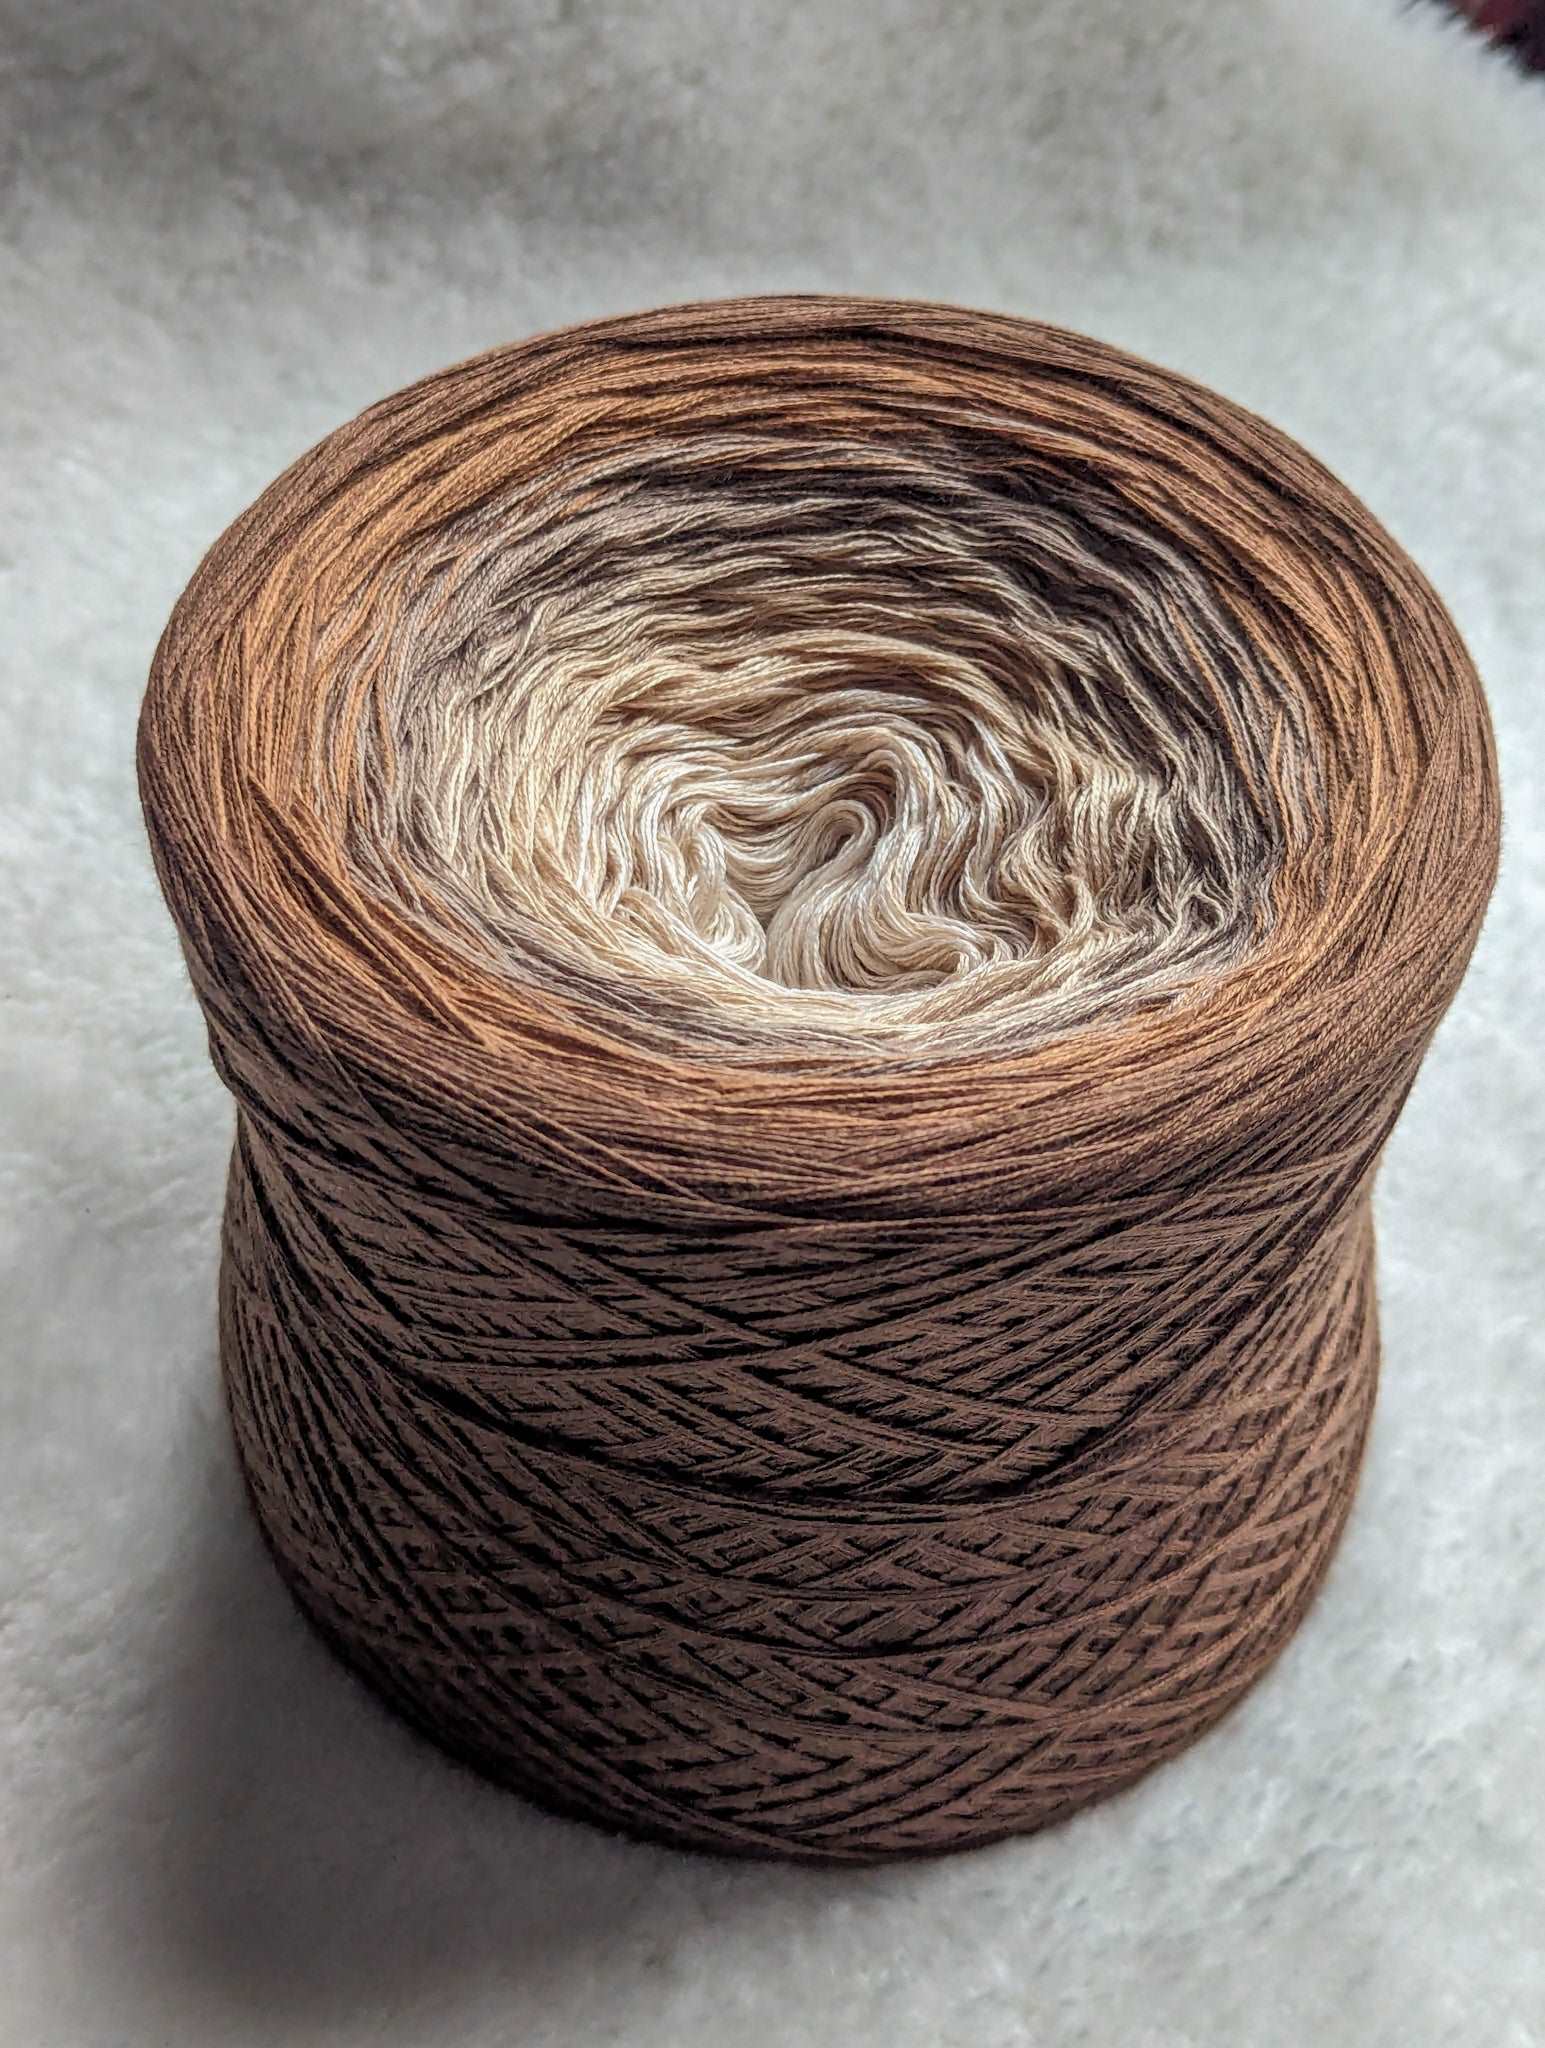 C308 cotton/acrylic ombre yarn cake, 285g, about 1000m, 4ply